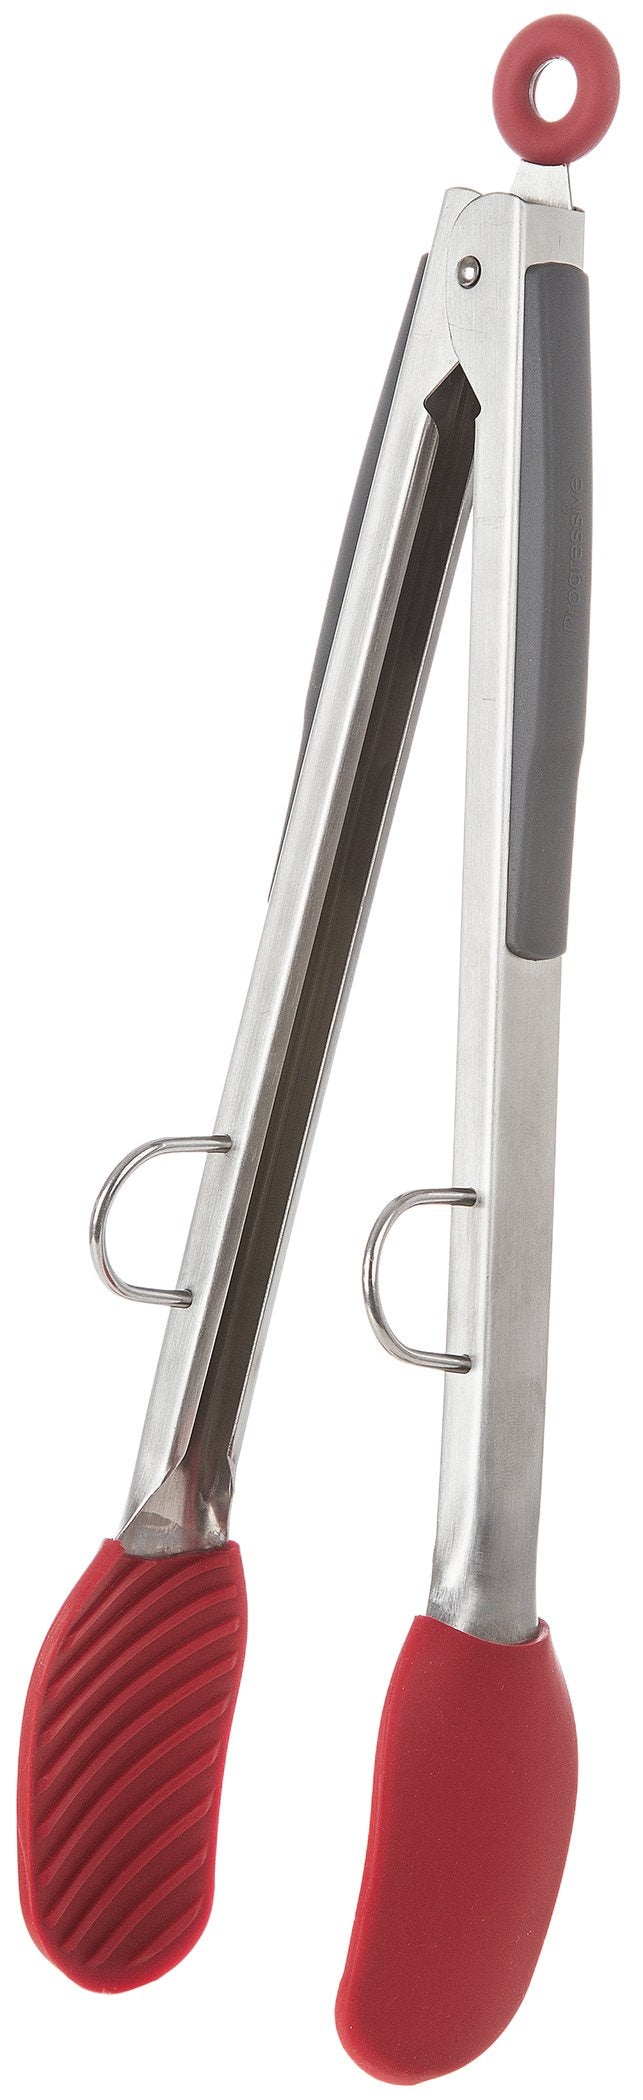 Prep Solutions by Progressive No Mess Tongs - 12 Inch